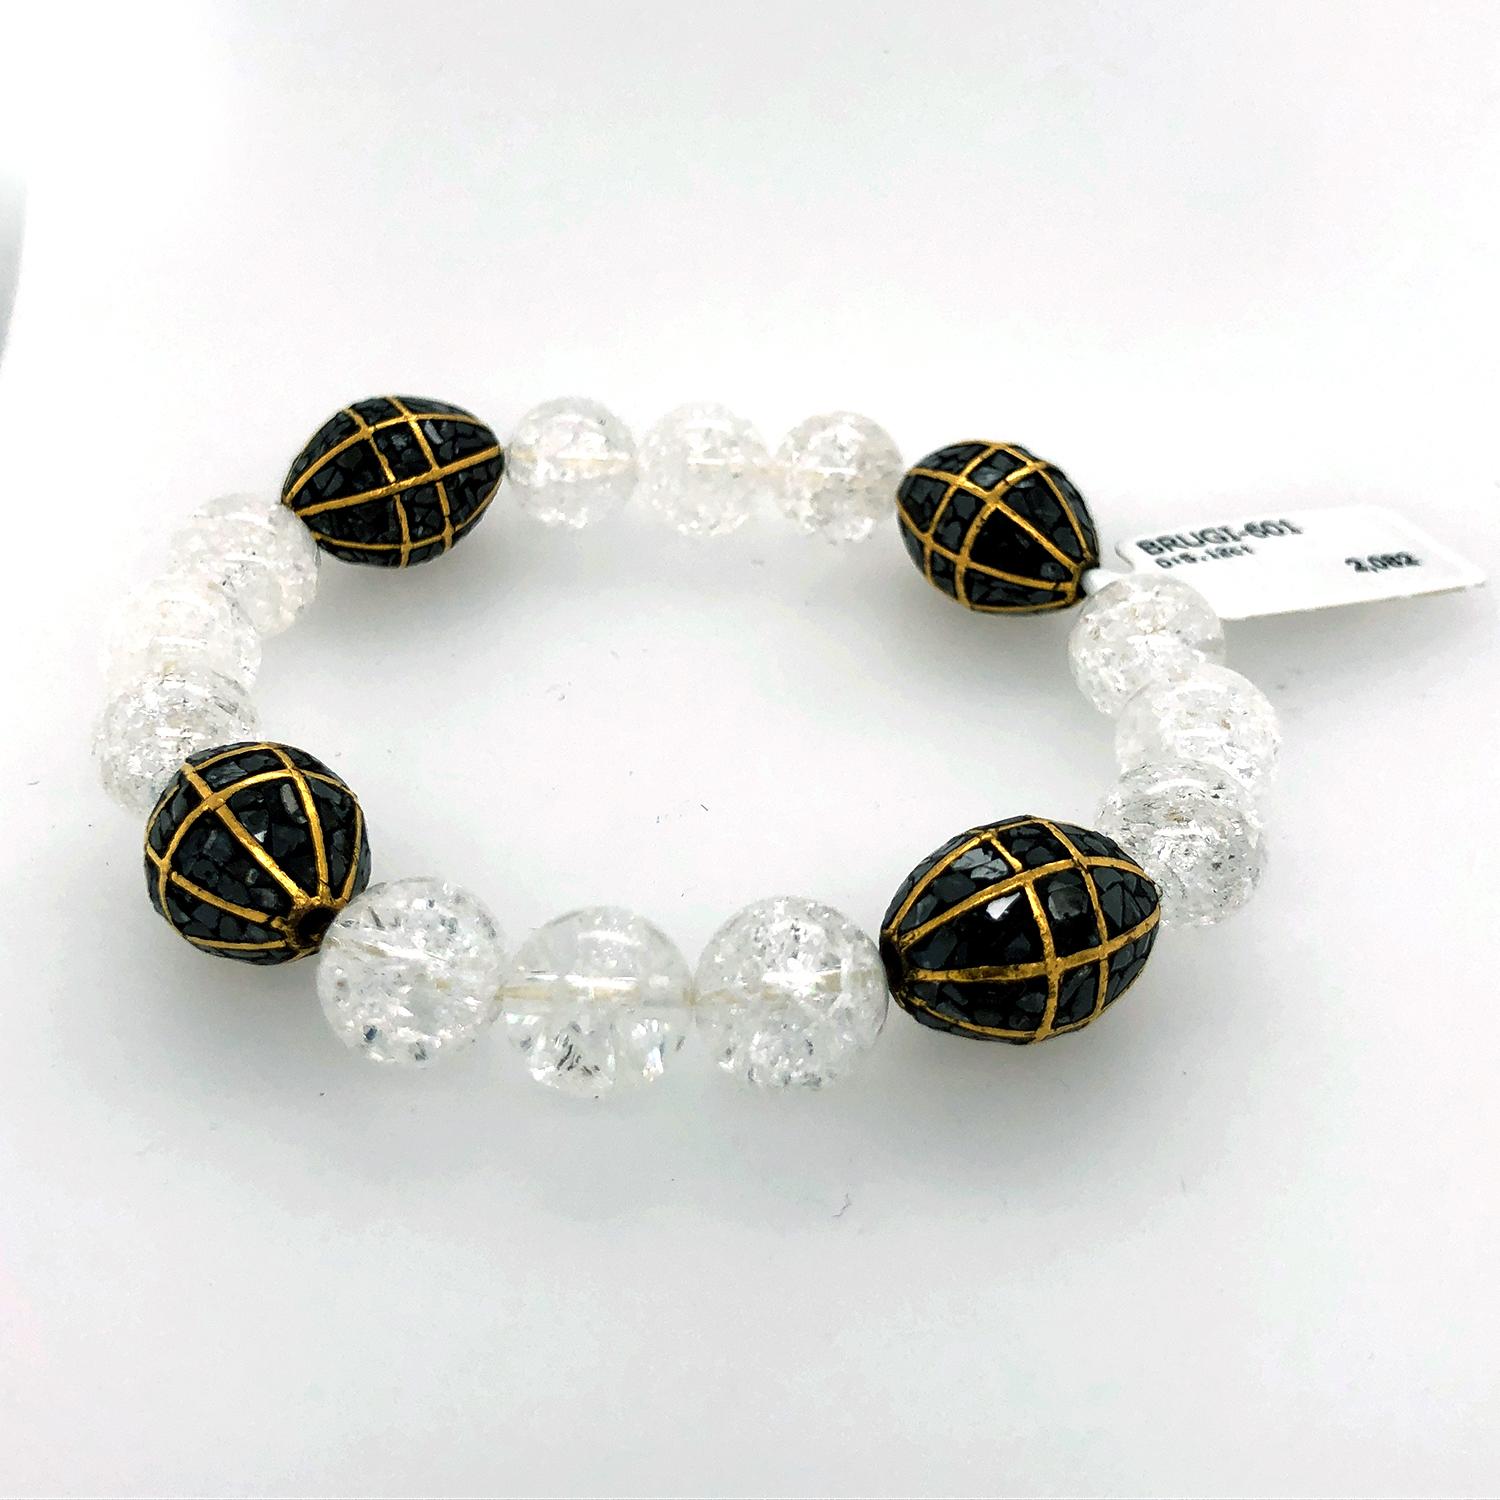 Great to stack this Black Diamond Oval shape bead and Crystal stretchable bracelet is lovely.

Diamond: 5.12cts
Quartz: 125cts
Bead Size:14-15mm
Crystal Bead Size:8-9 mm
 